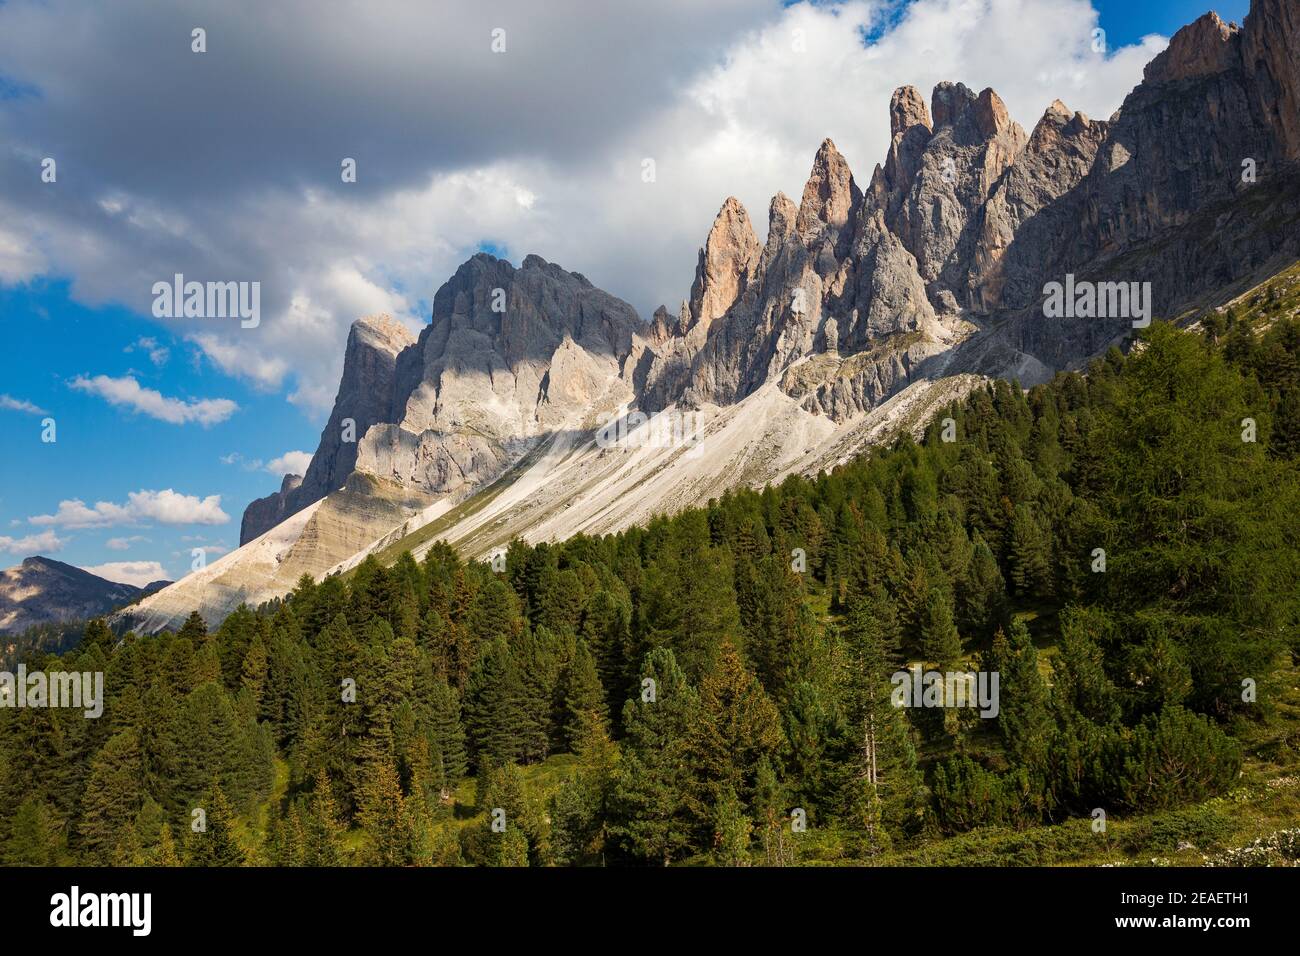 The Odle mountain group. Coniferous forest. Val di Funes, The Gardena Dolomites, South Tyrol, Italian Alps. Europe. Stock Photo